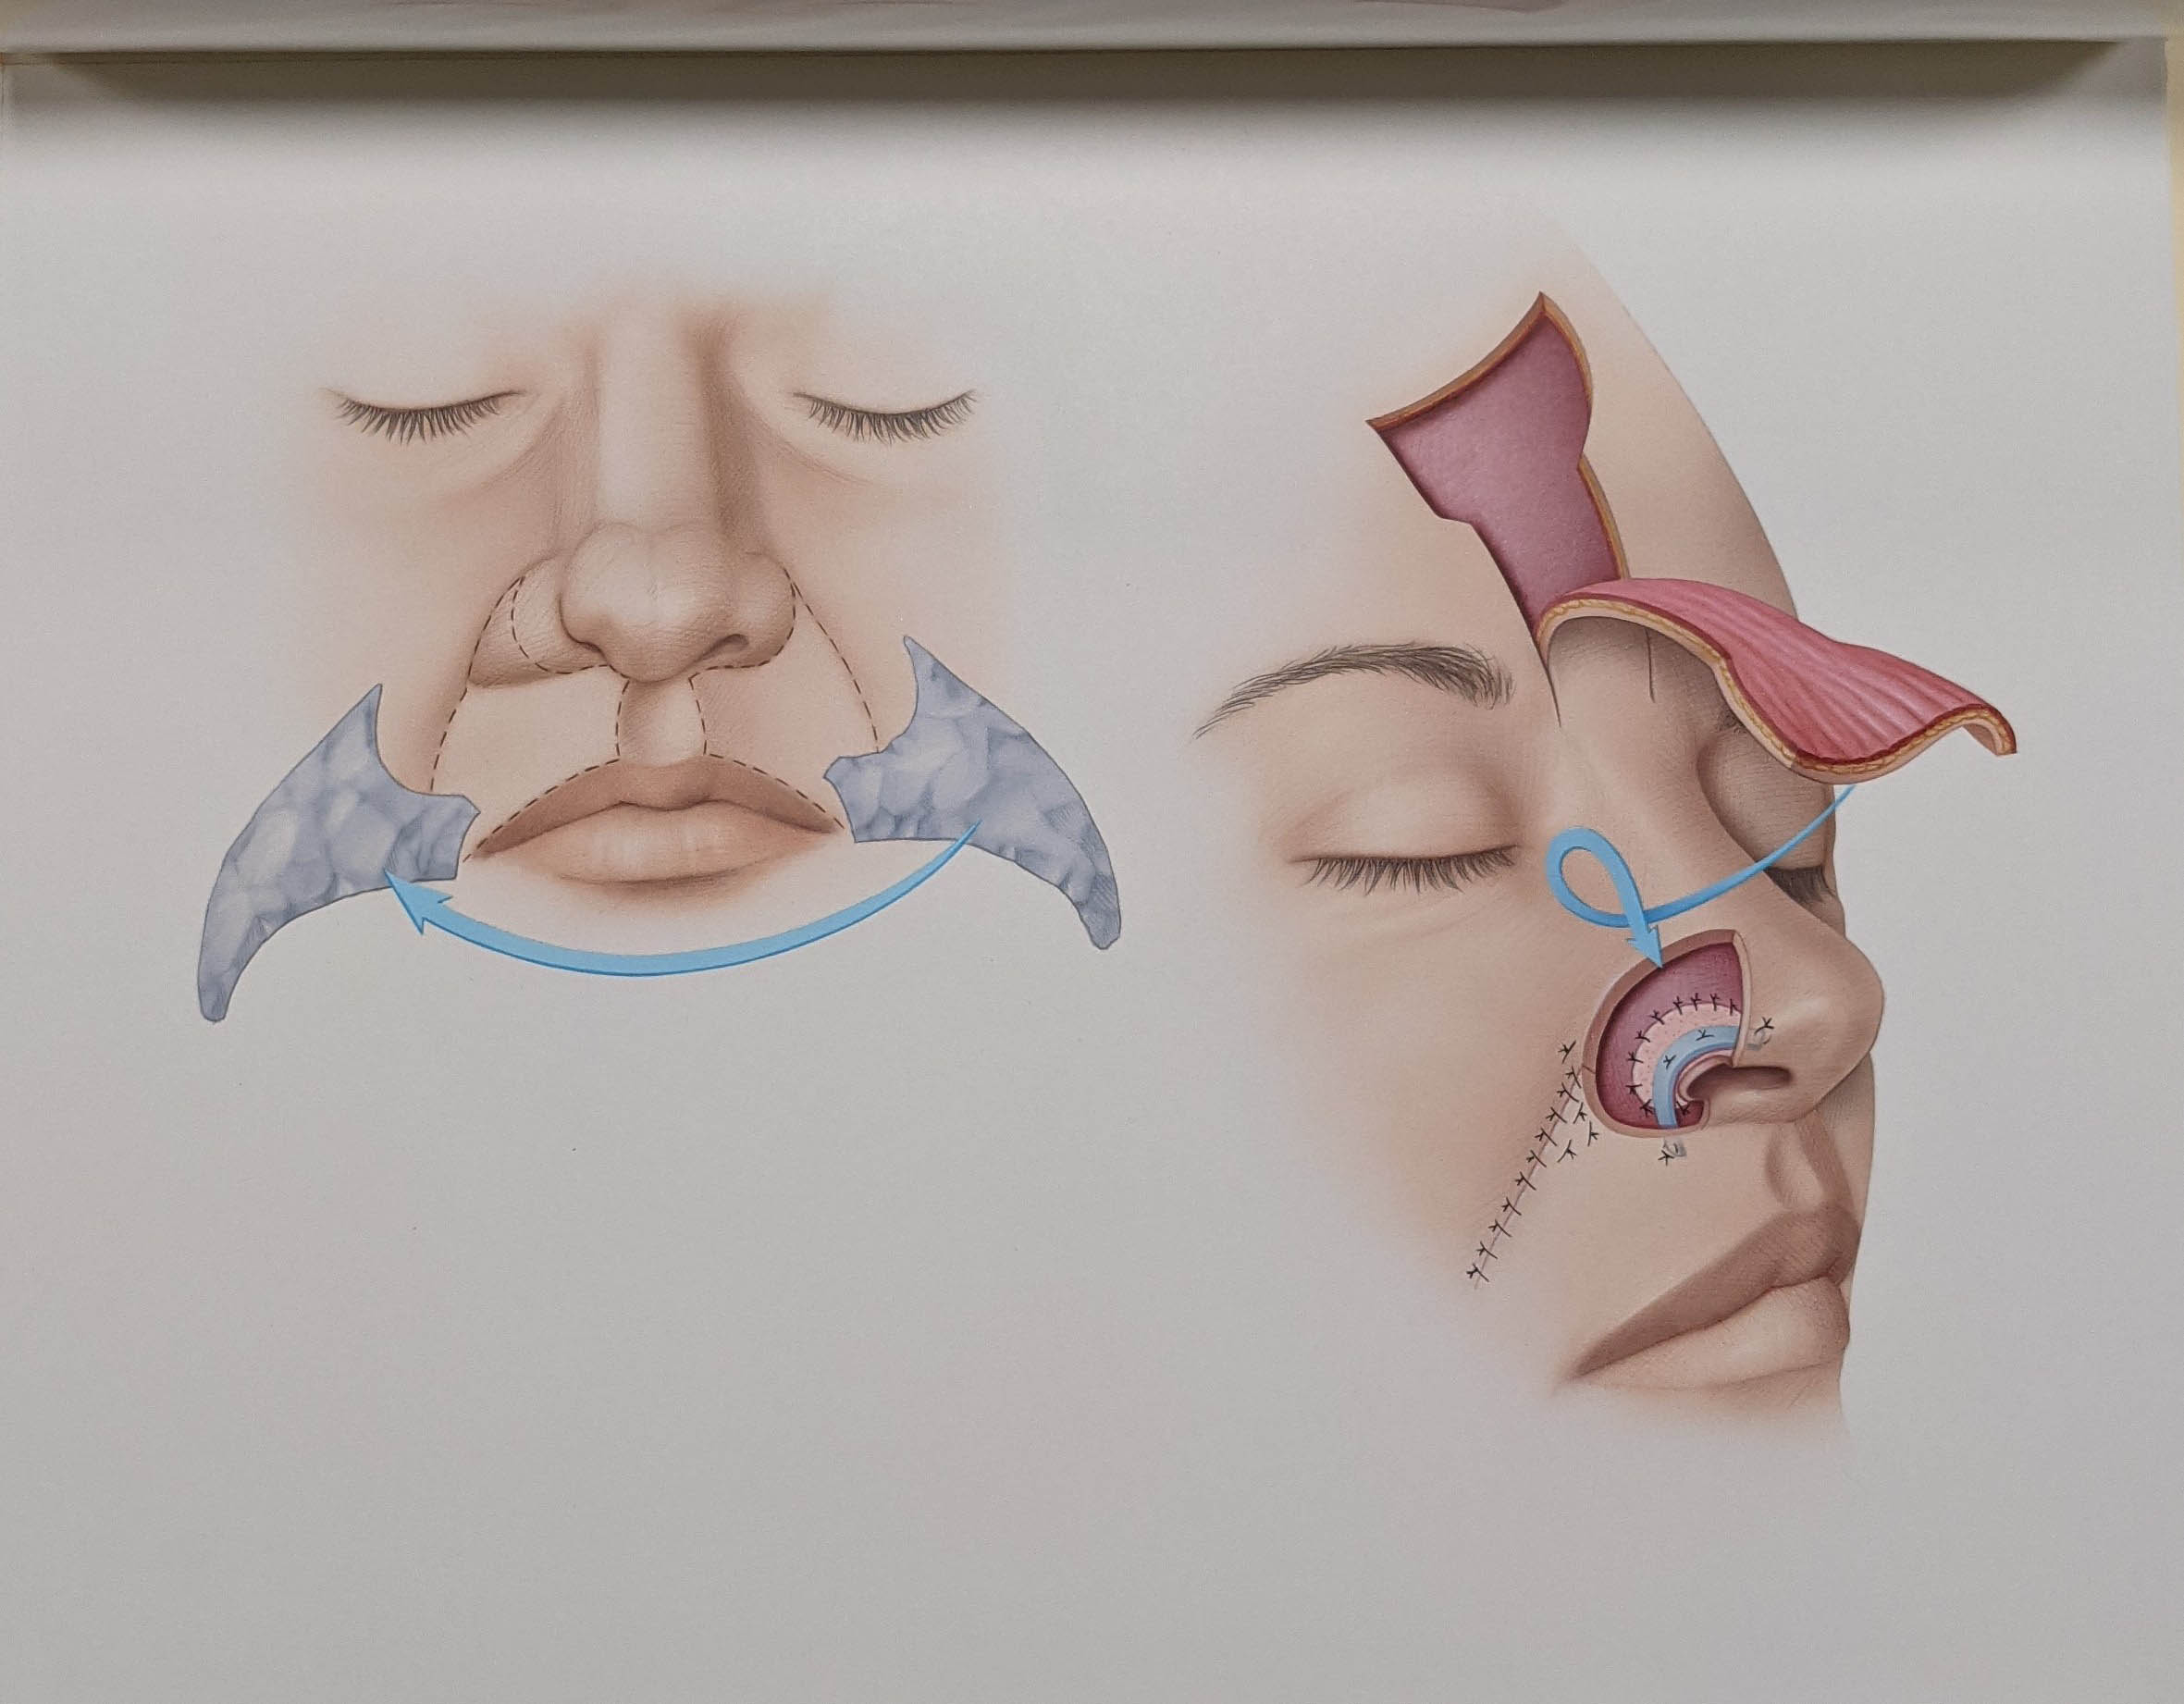 medical illustration of a white person's face being reconstructed